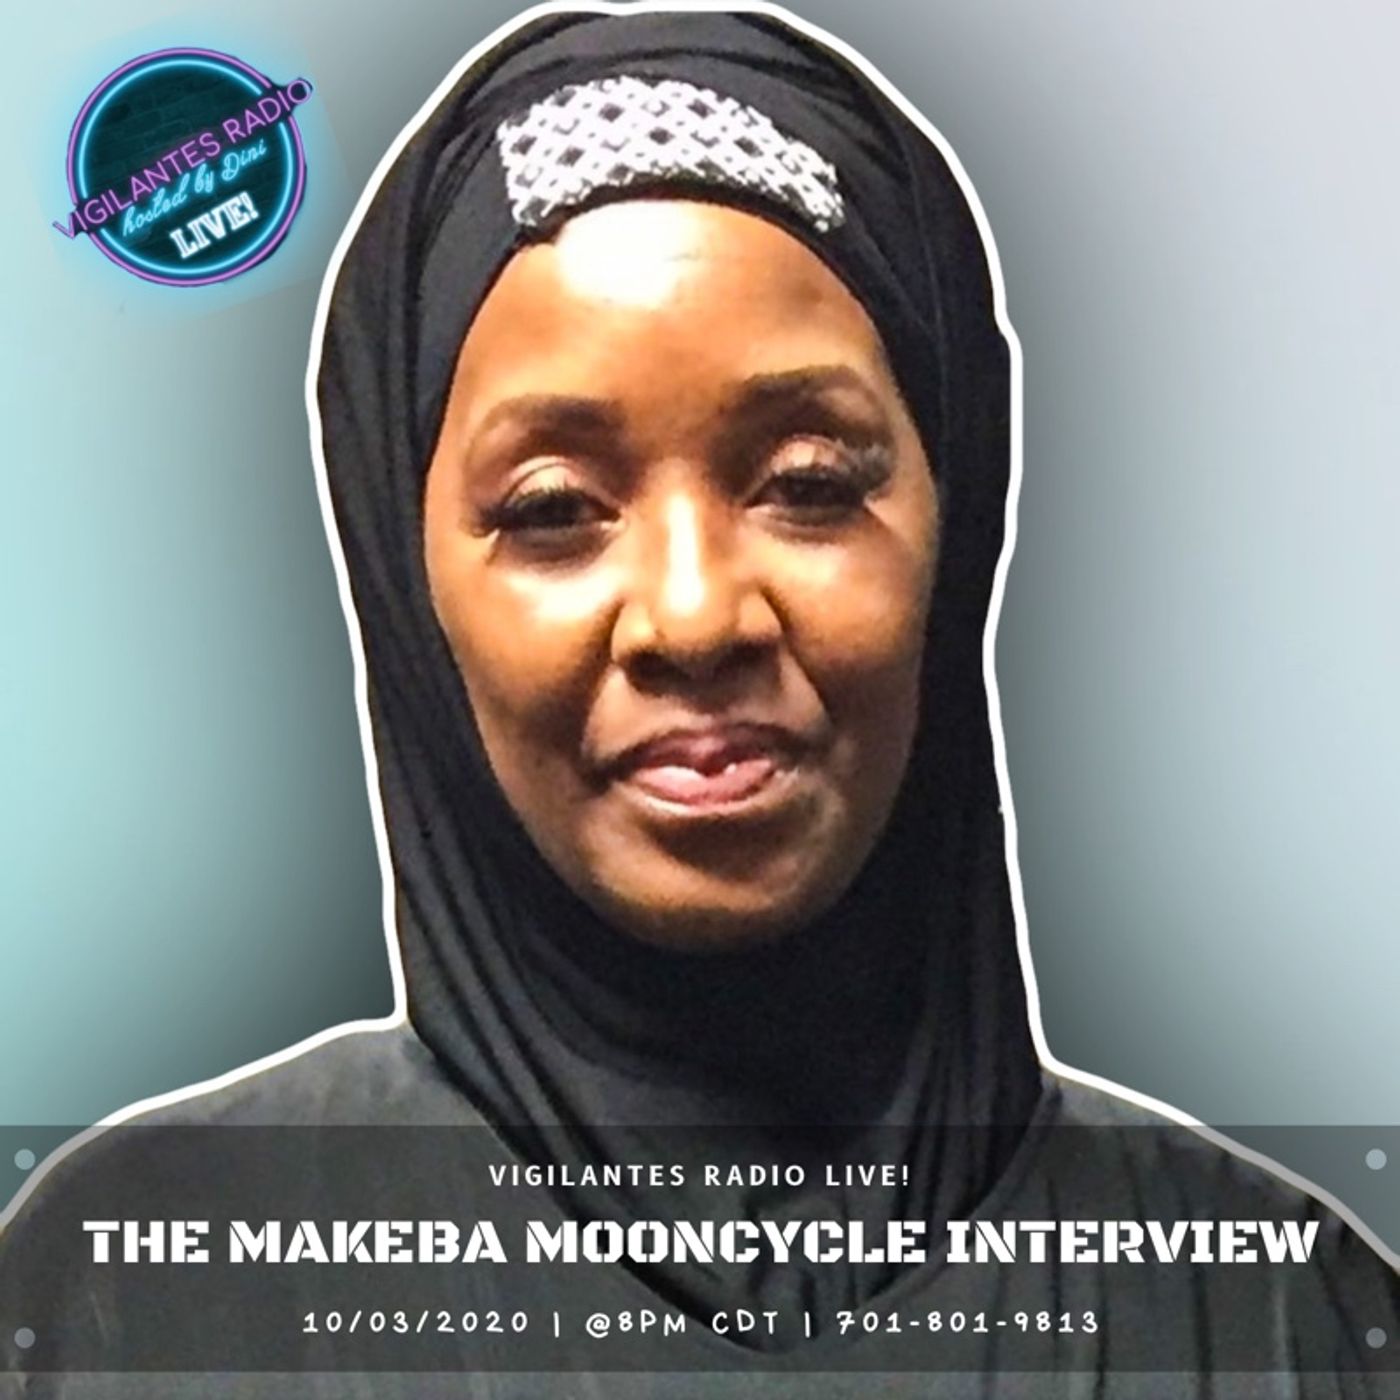 The Makeba Mooncycle Interview. Image